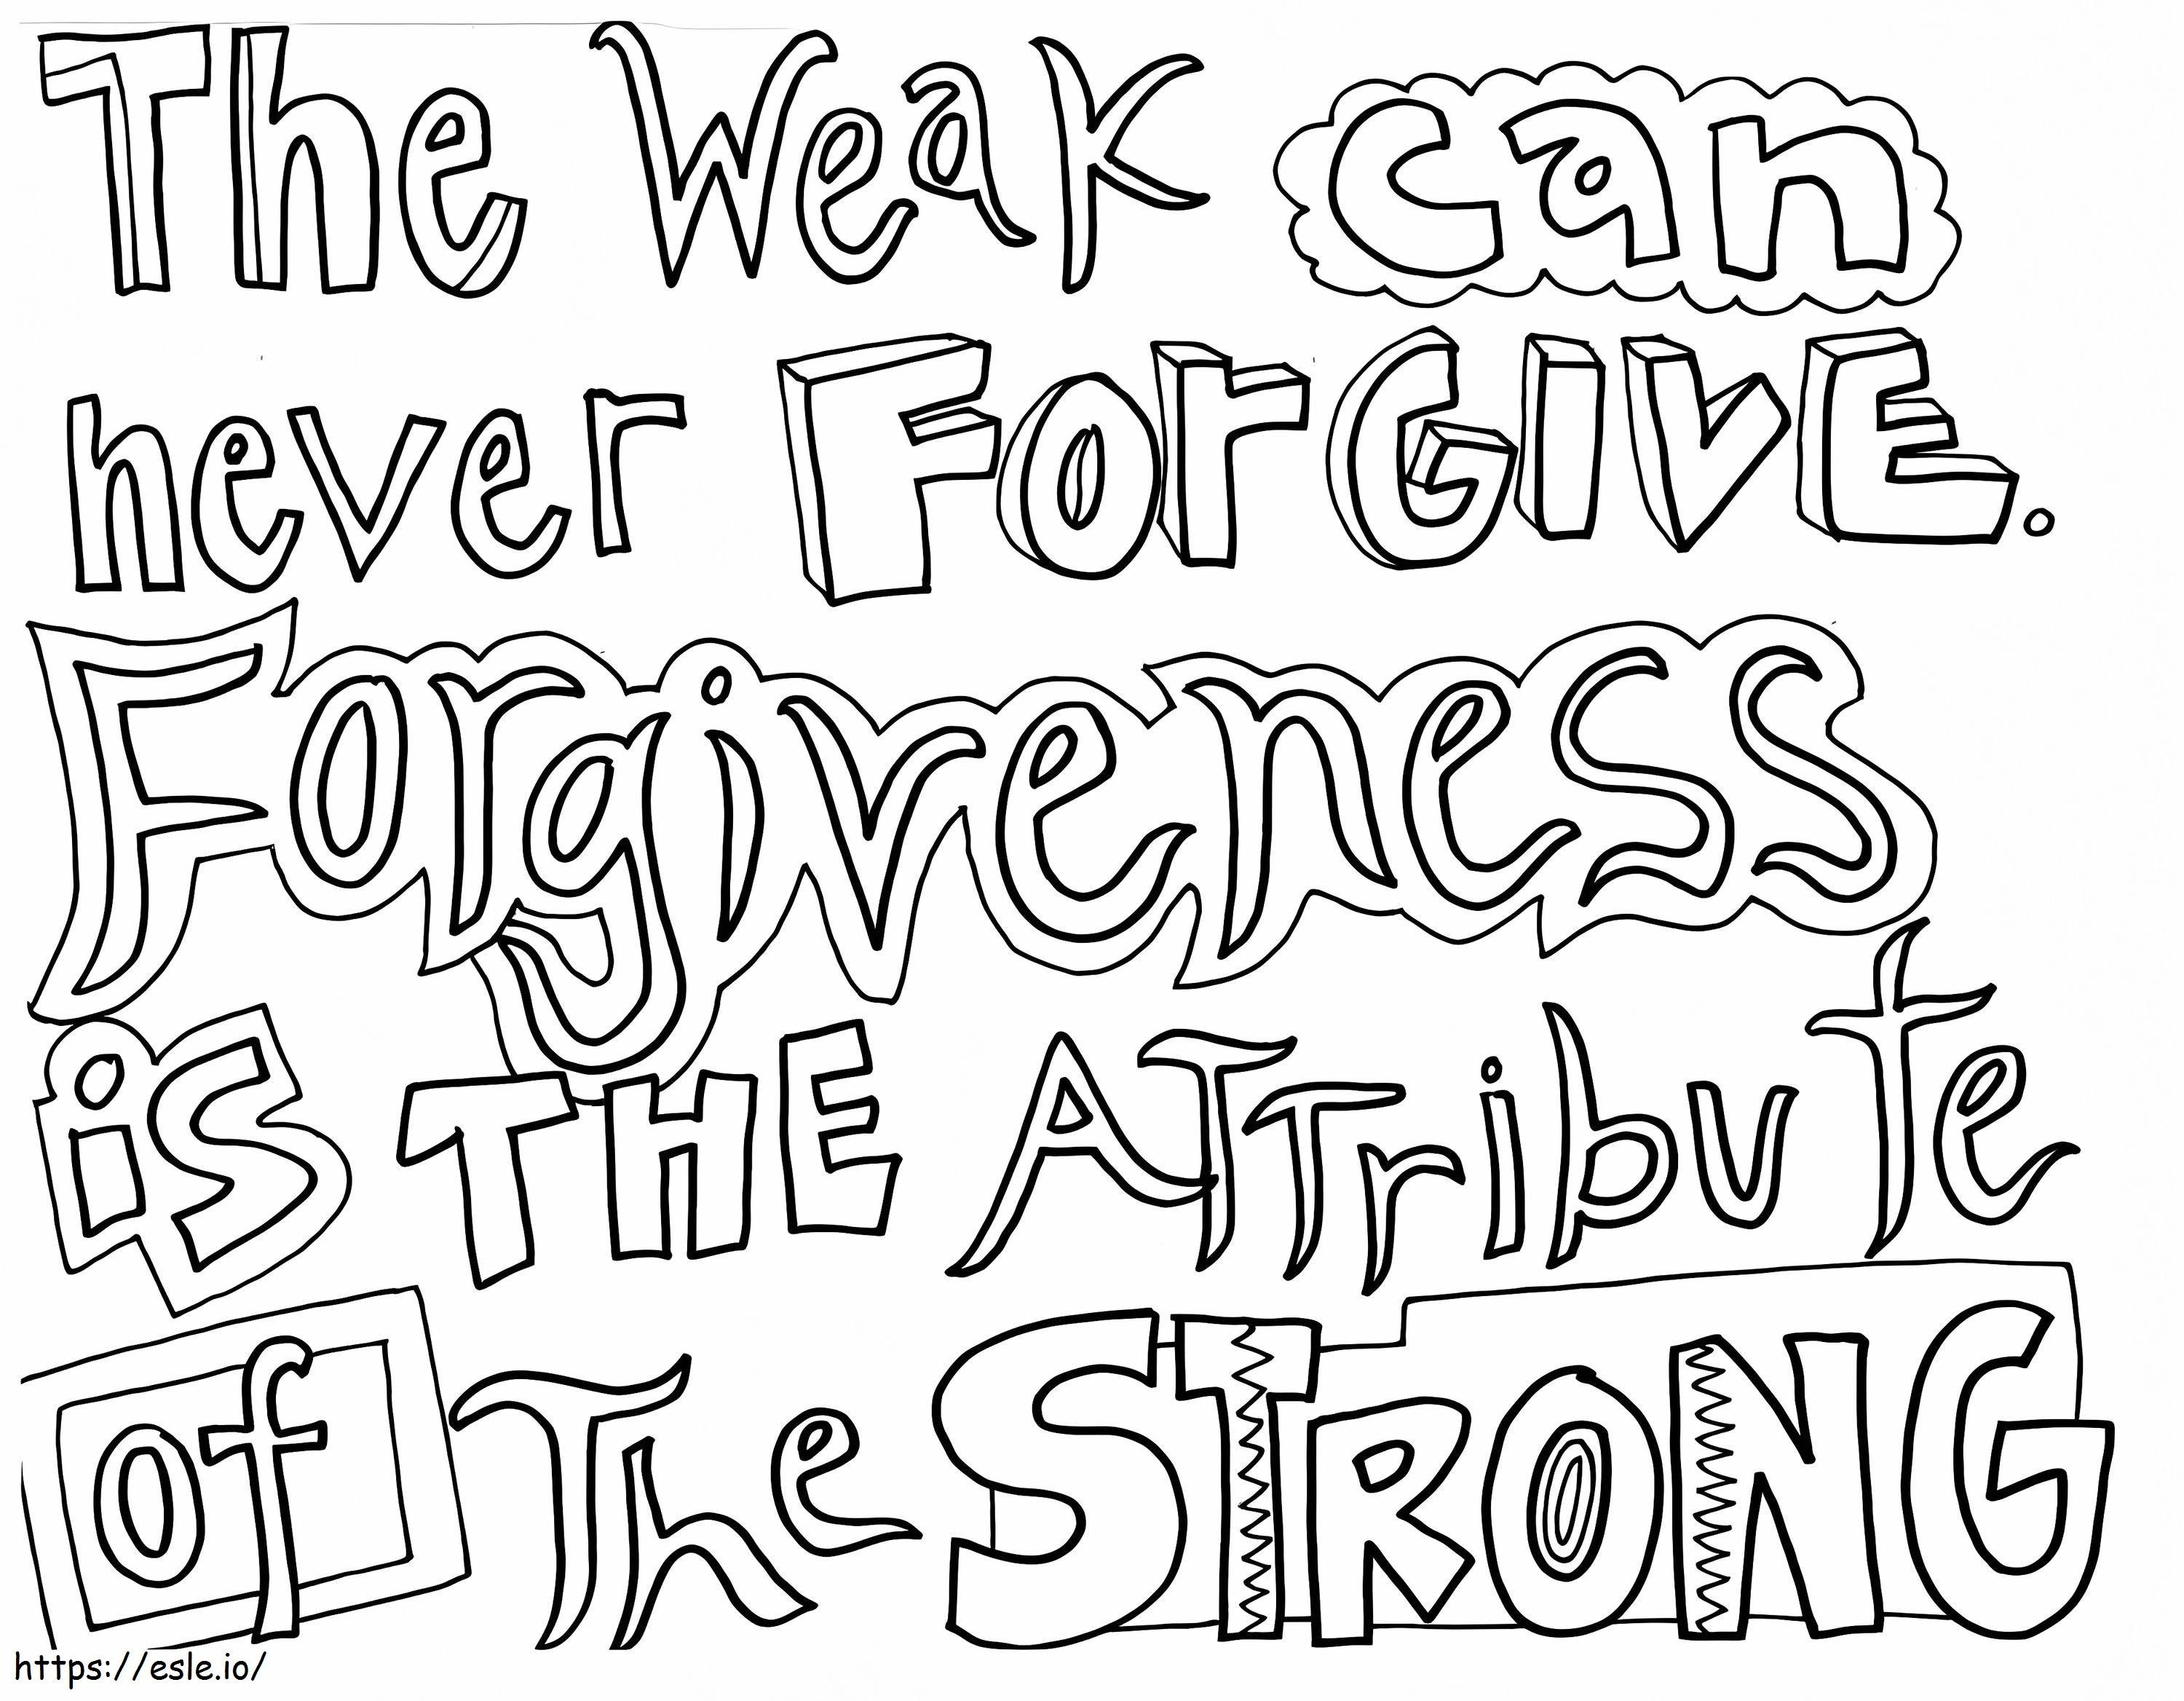 Forgiveness Quote coloring page